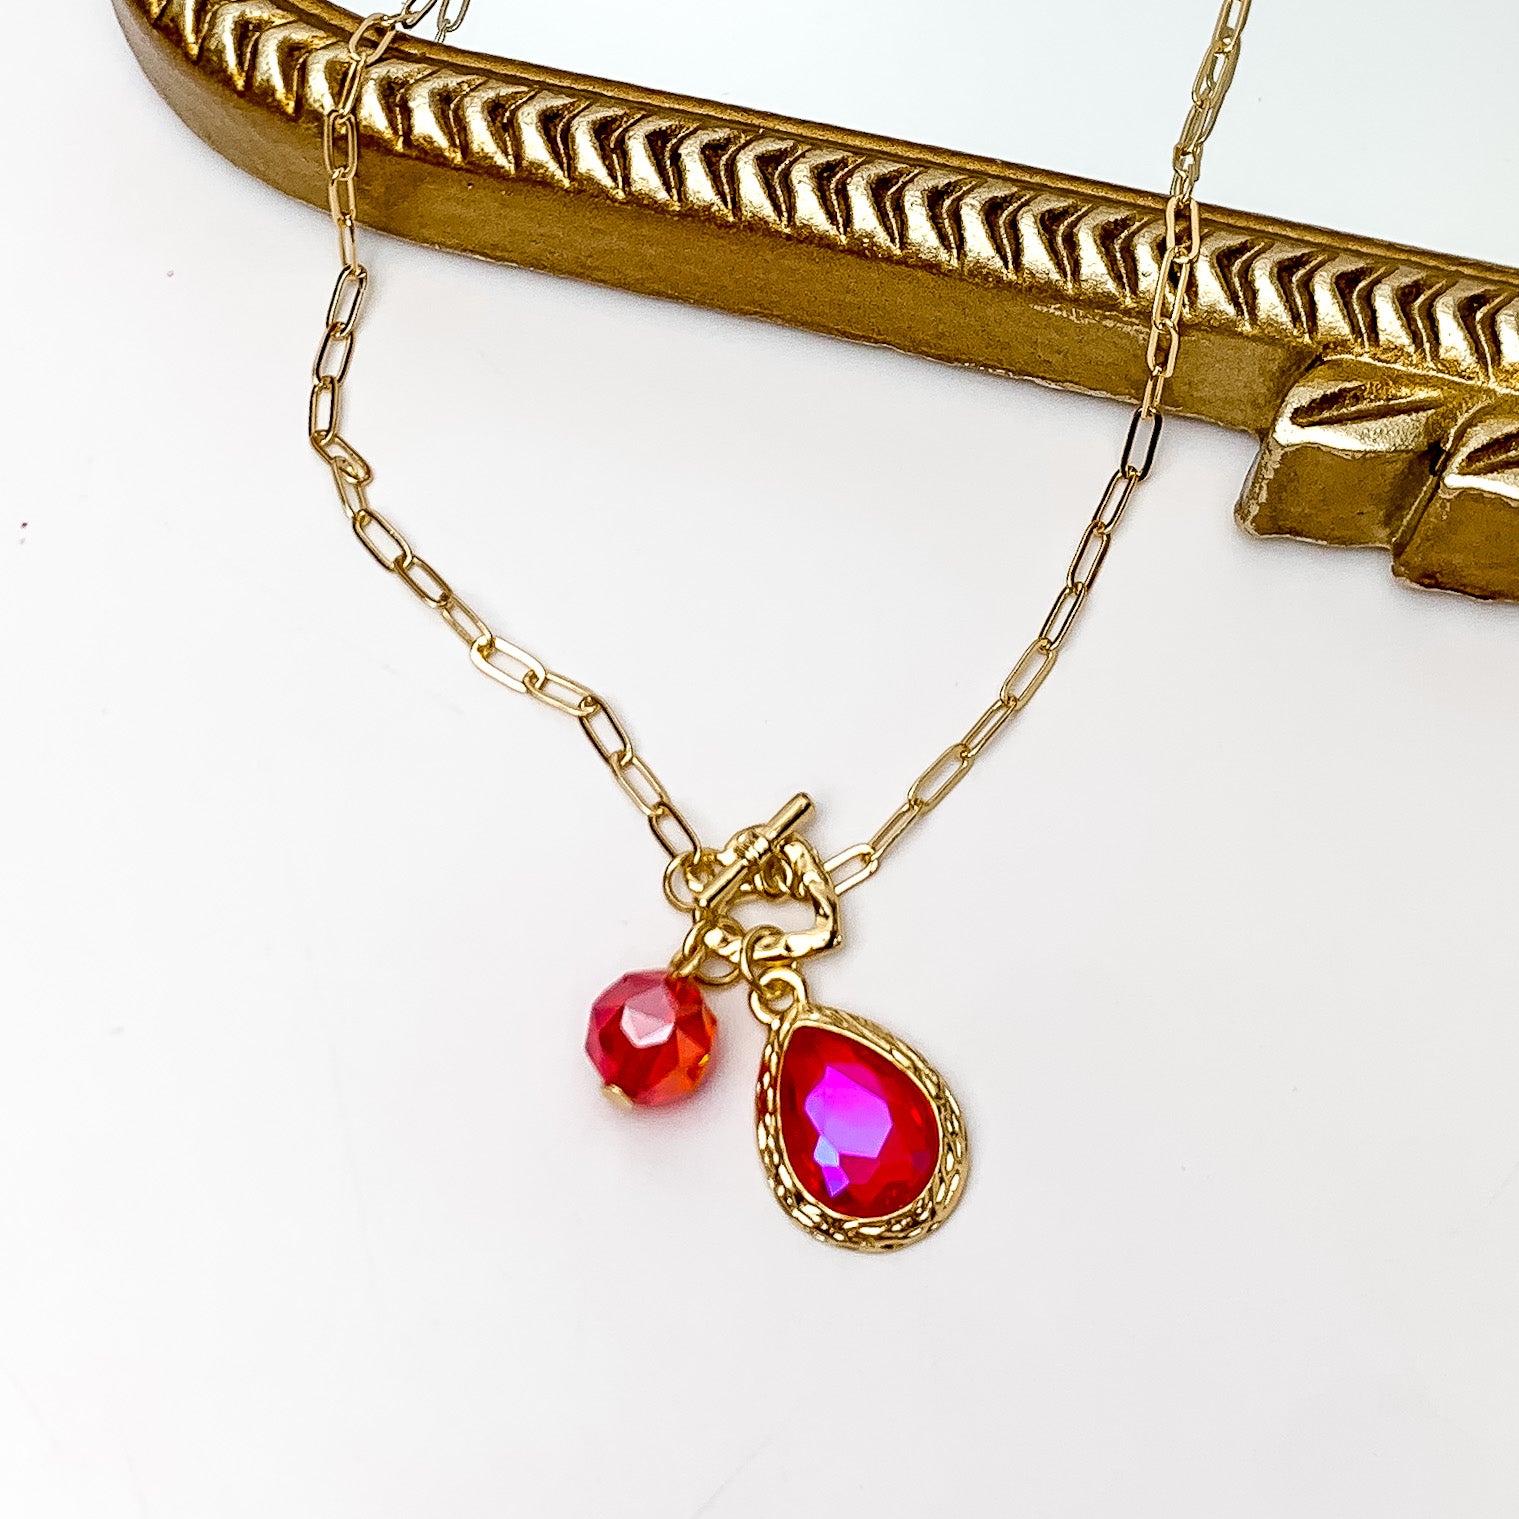 Pink Panache | Gold Tone Chain Necklace with Heart Toggle and Fuchsia Pink Crystal Charms - Giddy Up Glamour Boutique